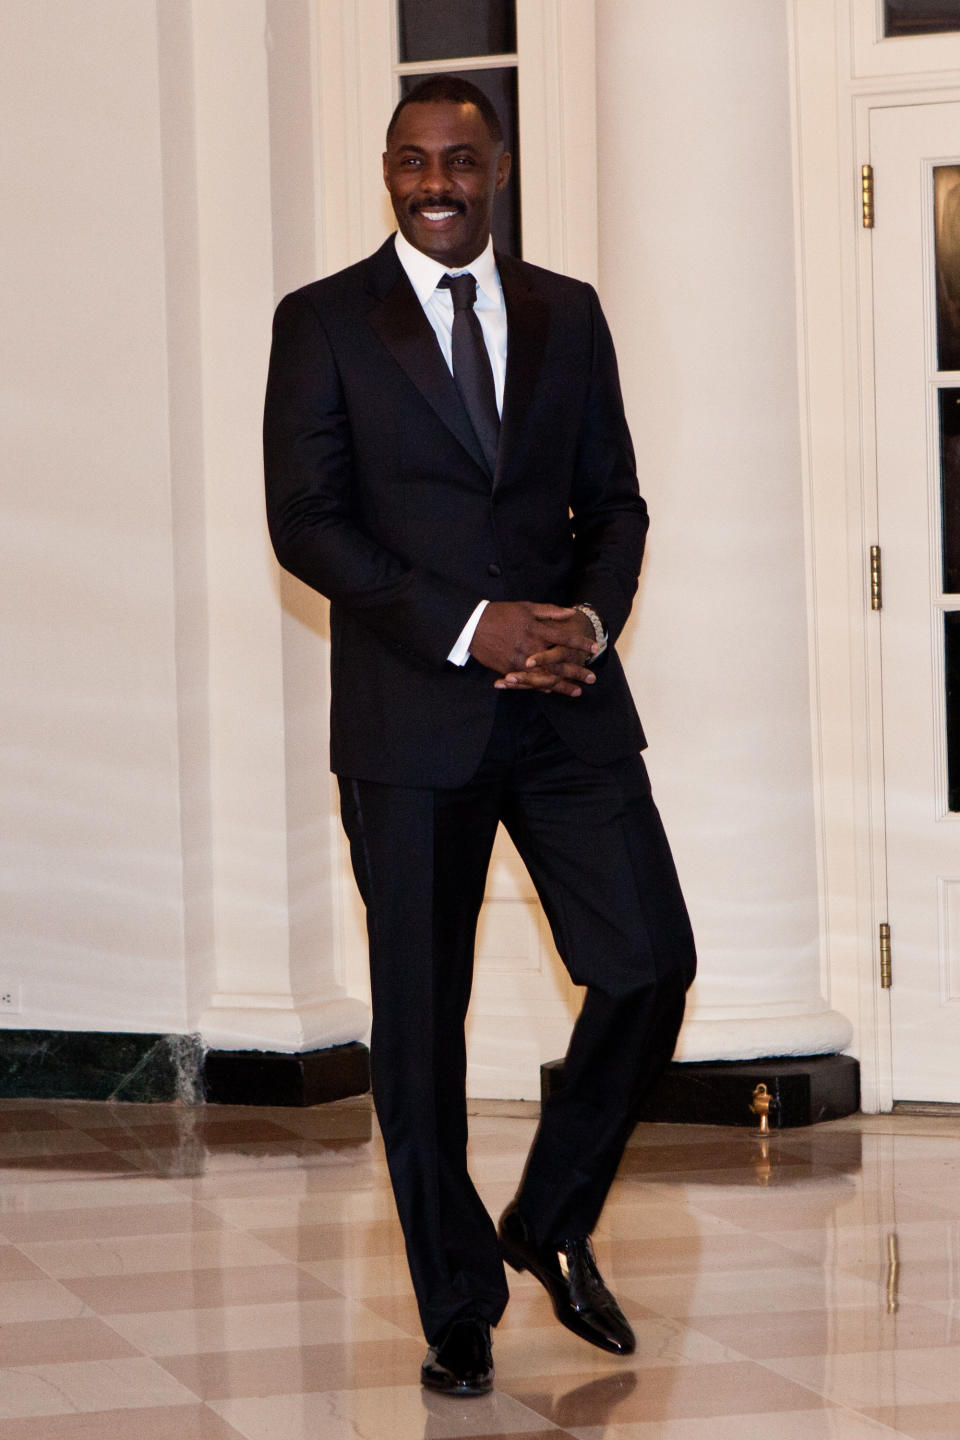 WASHINGTON - MARCH 14: Actor Idris Elba arrives for a State Dinner in honor of British Prime Minister David Cameron at the White House on March 14, 2012 in Washington, DC. Cameron is on a three day official visit to Washington. (Photo by Brendan Hoffman/Getty Images)